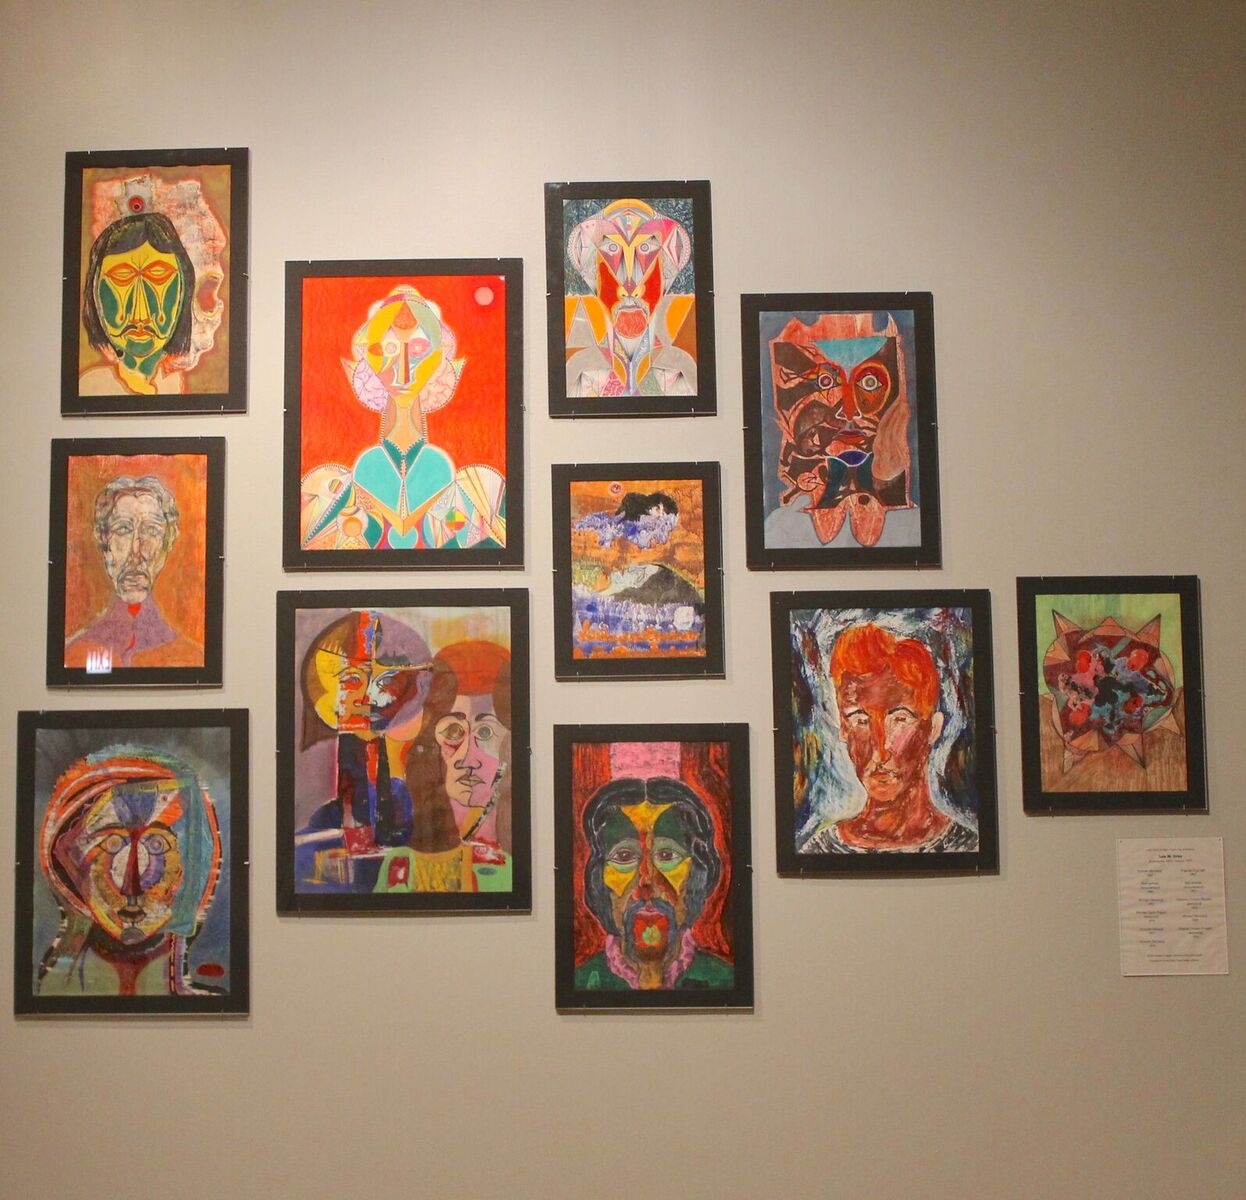 Detail of an exhibition wall showing portraits by Luis M. Ortiz. Eleven portraits are displayed. The portraits use flattened or angular planes for the faces and features, in alternating bright and earthy colors. In some places the paint on the portraits is rough and textured. Photo by Melissa Patiño Cervantes.